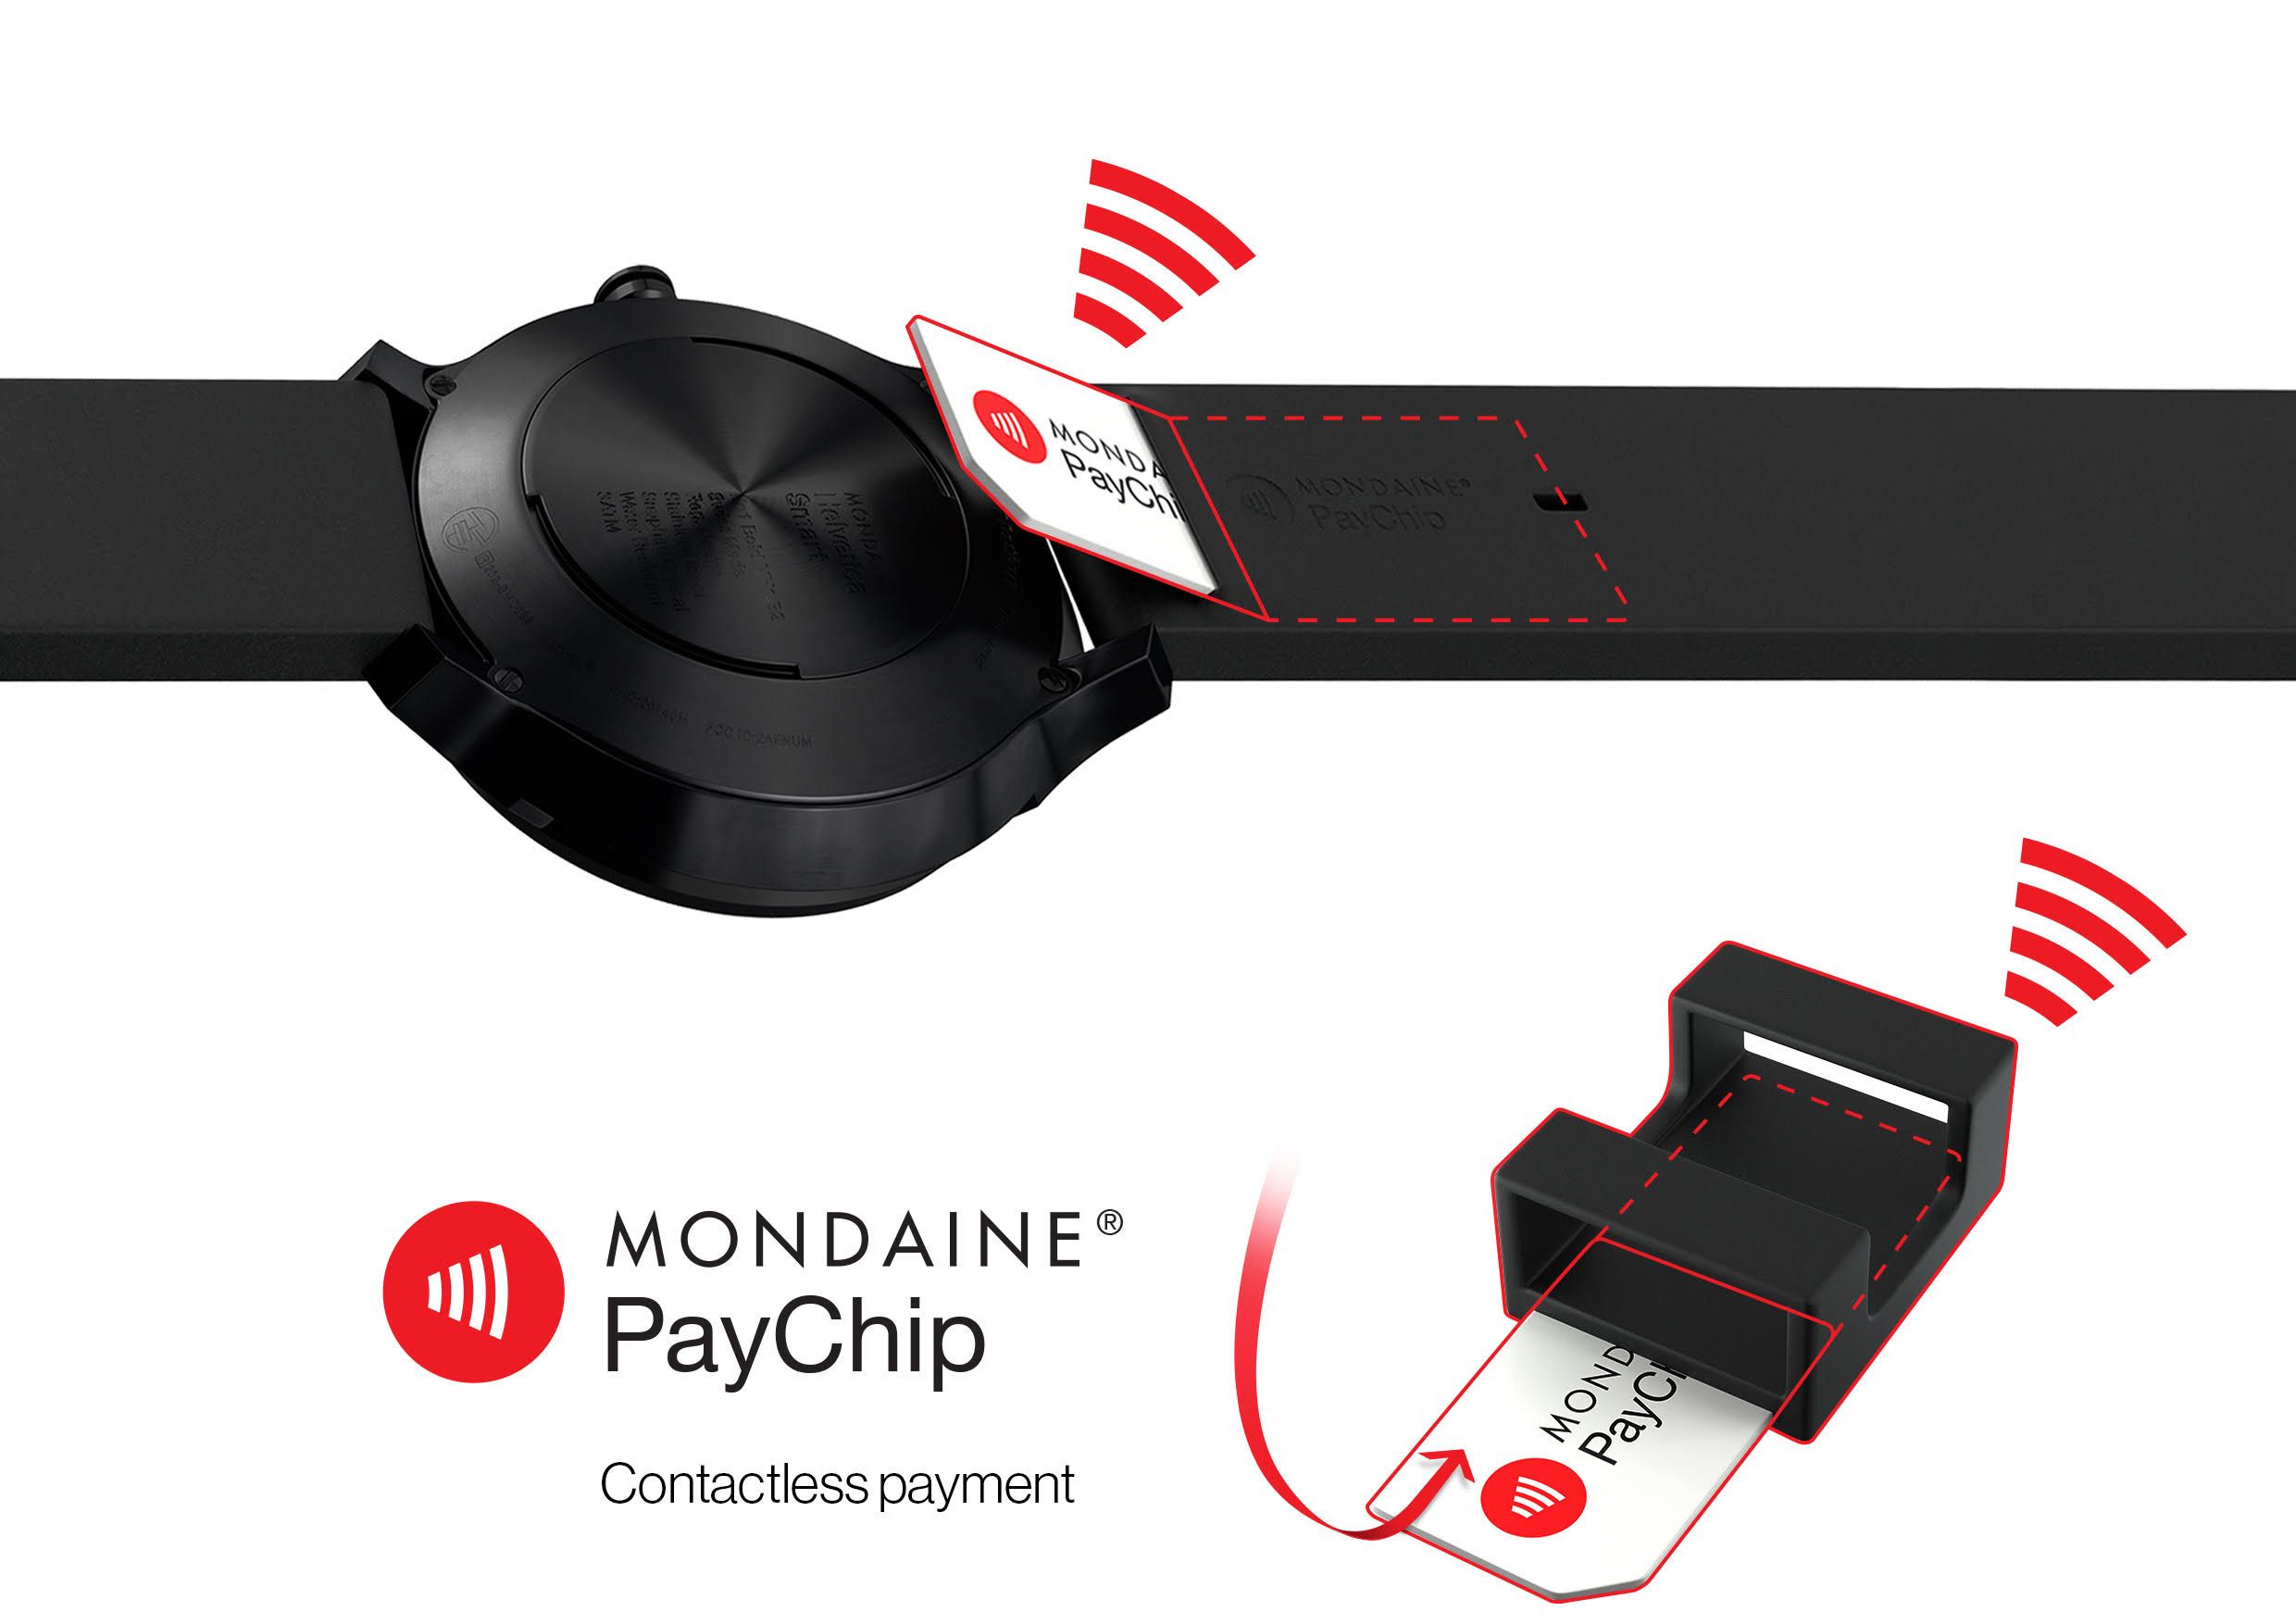 mondaine adds paychip contactless payments to new swiss smartwatch image 1